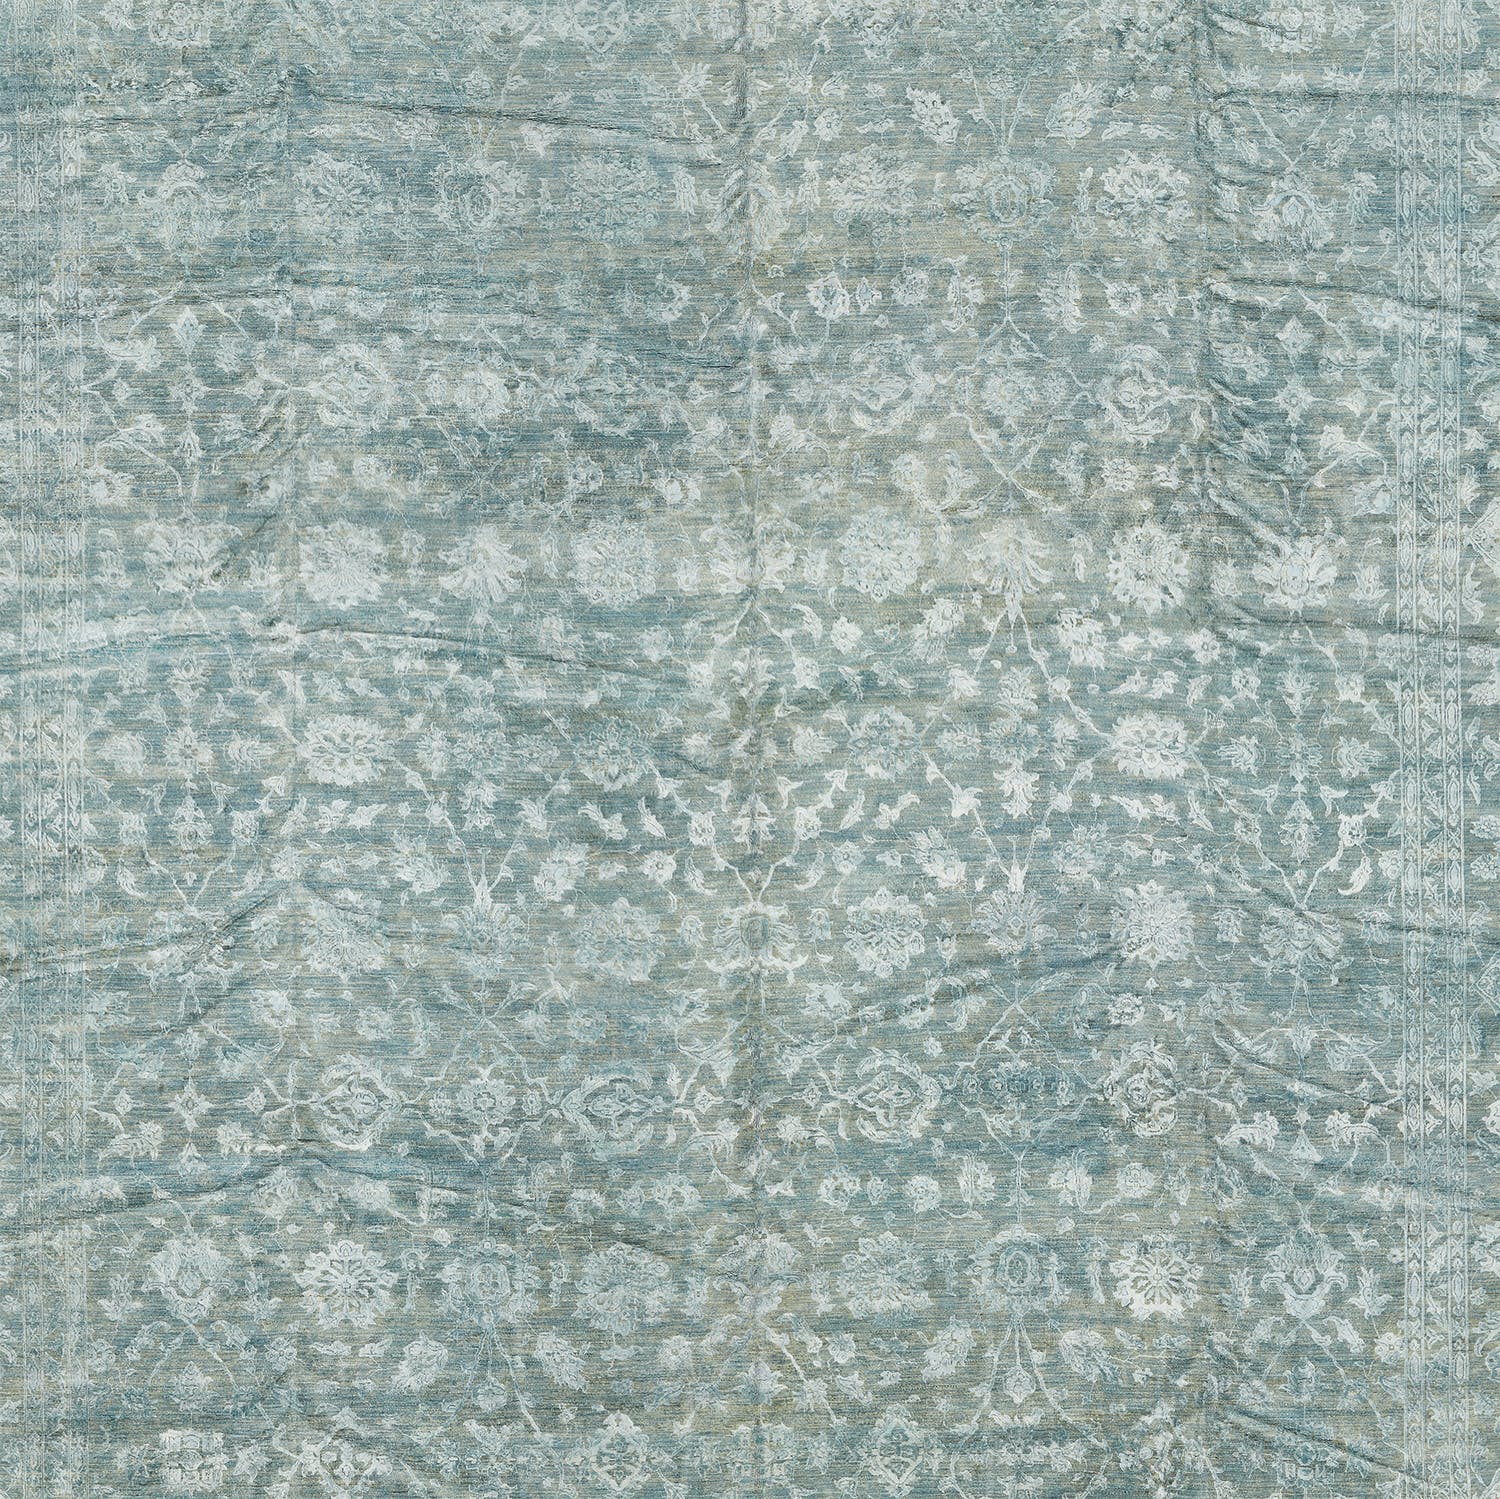 Close-up of a vintage-inspired blue rug with intricate floral motifs